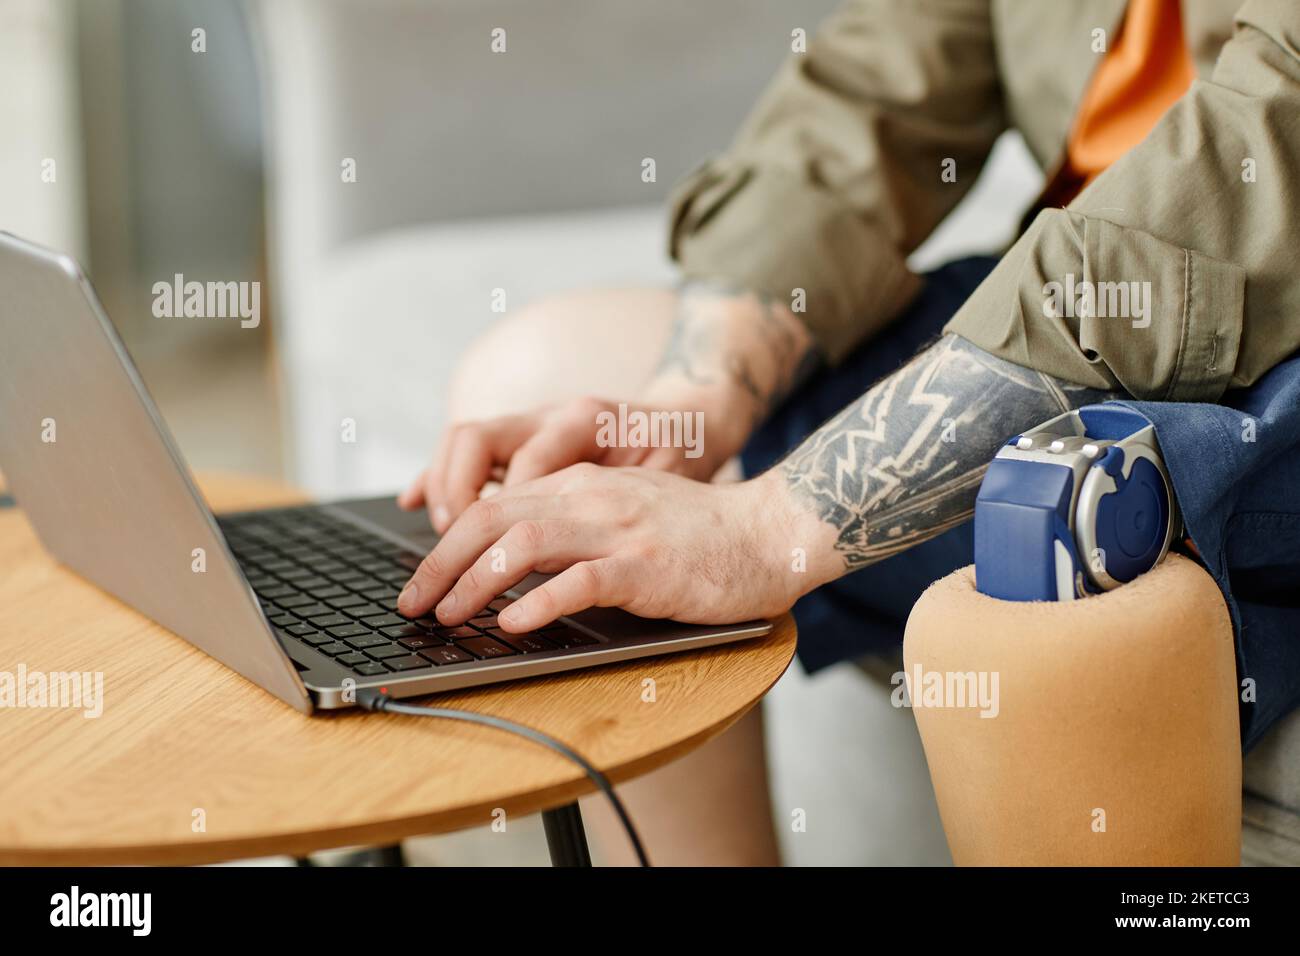 Closeup of man with prosthetic leg using laptop while working, copy space Stock Photo